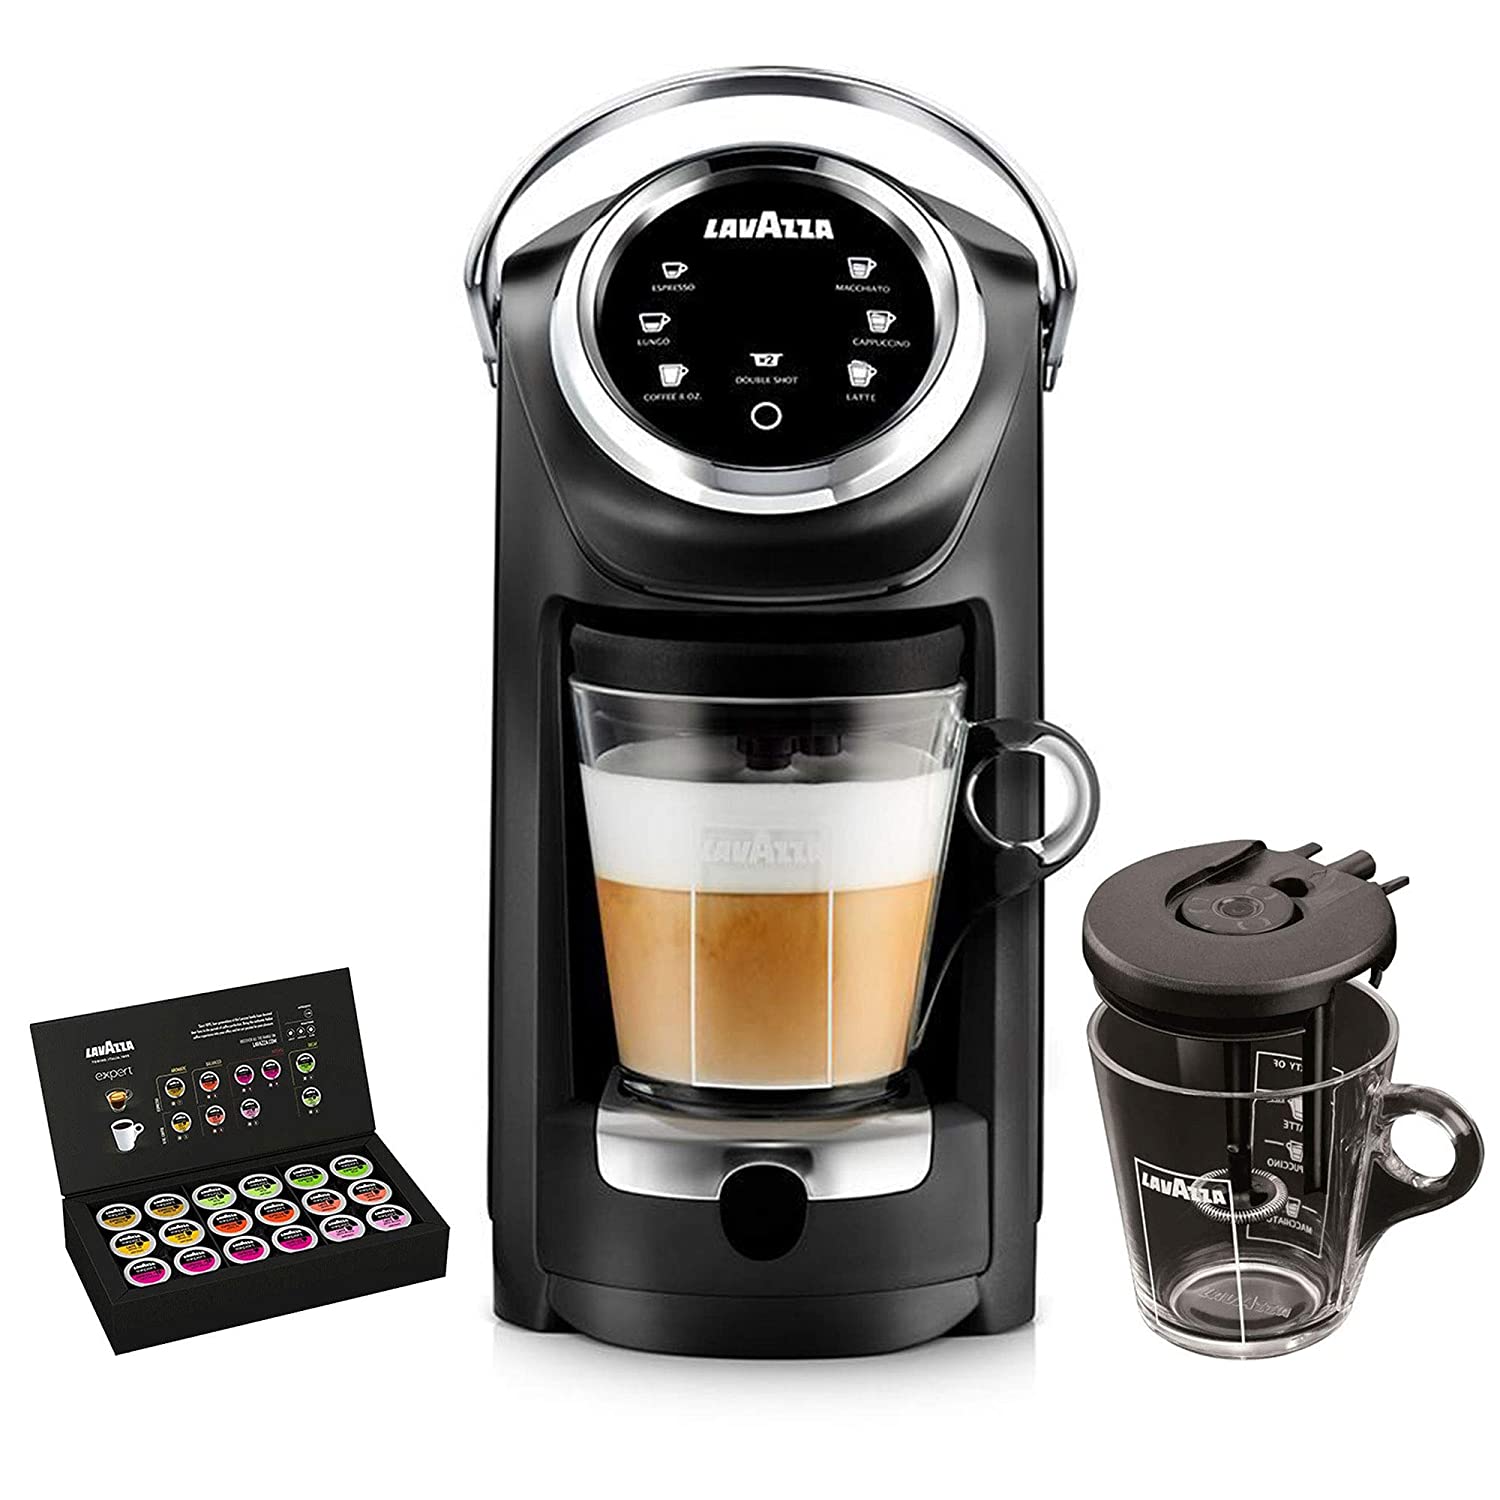 Lavazza LB400 Classy Plus All-In-One plus Expert Coffee Bundle (LB 400 + 1 Welcome Kit of 36 Capsules + 1 Extra Vessel) $189.70 after 25% coupon and 15% S&S discount